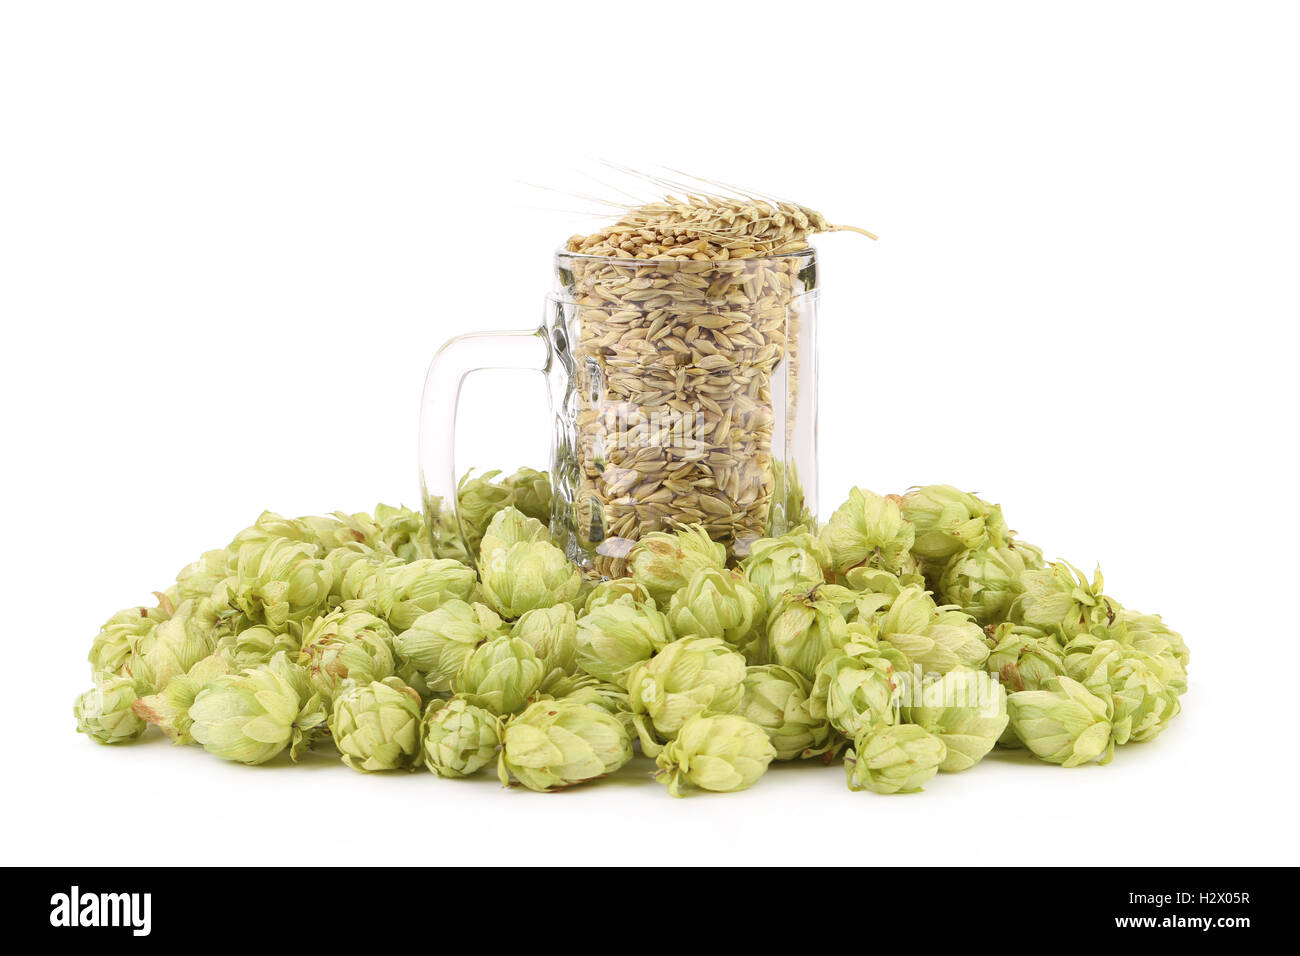 Glass full of barley and hops. Stock Photo